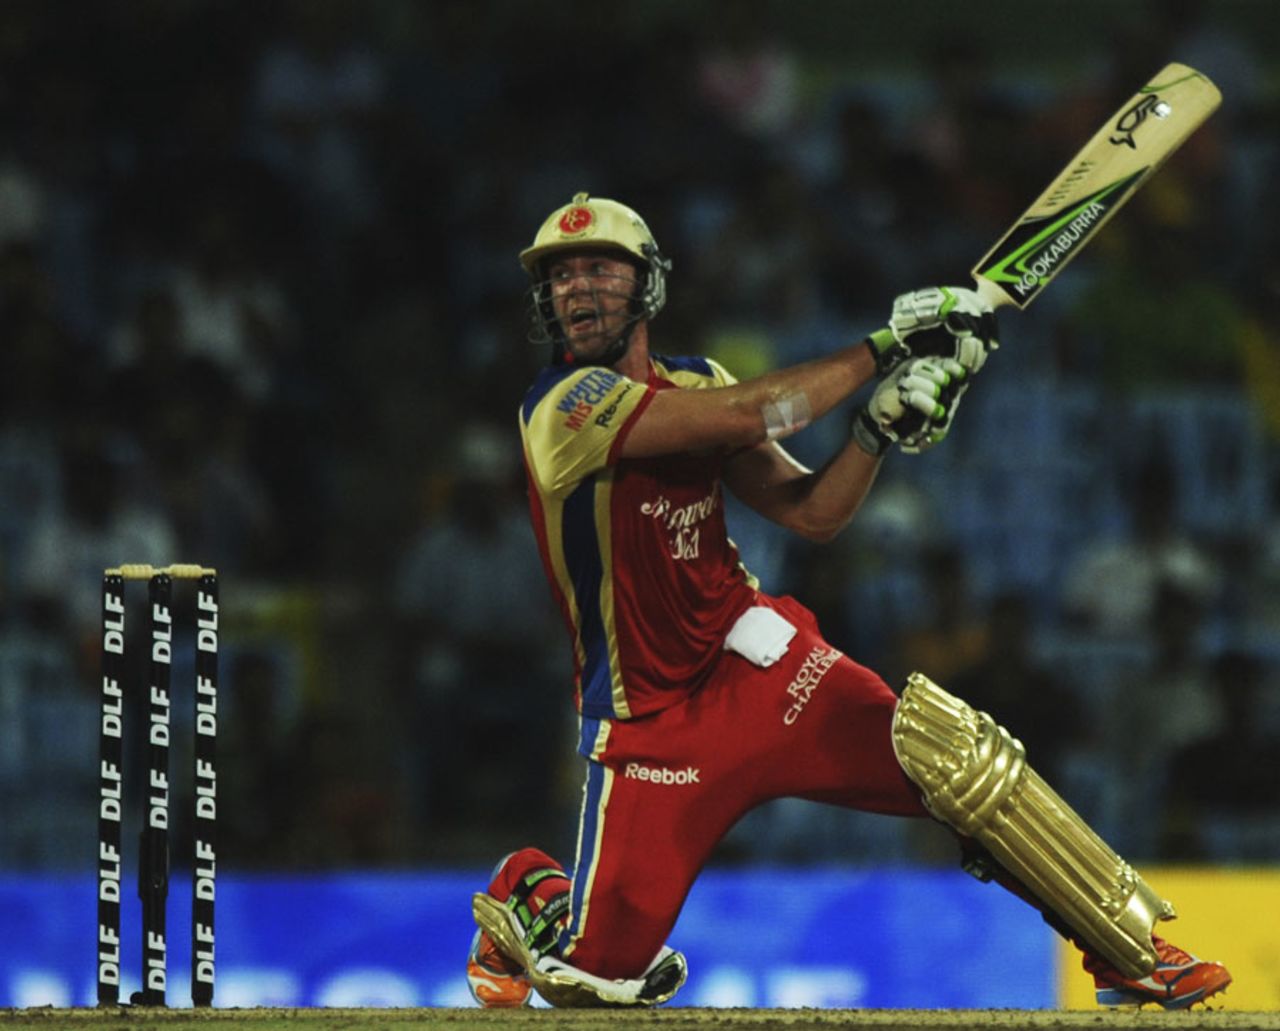 AB de Villiers lofts one into the off side during his 64 off 44 balls, Chennai Super Kings v Royal Challengers Bangalore, IPL 2011, Chennai,  April 16, 2011